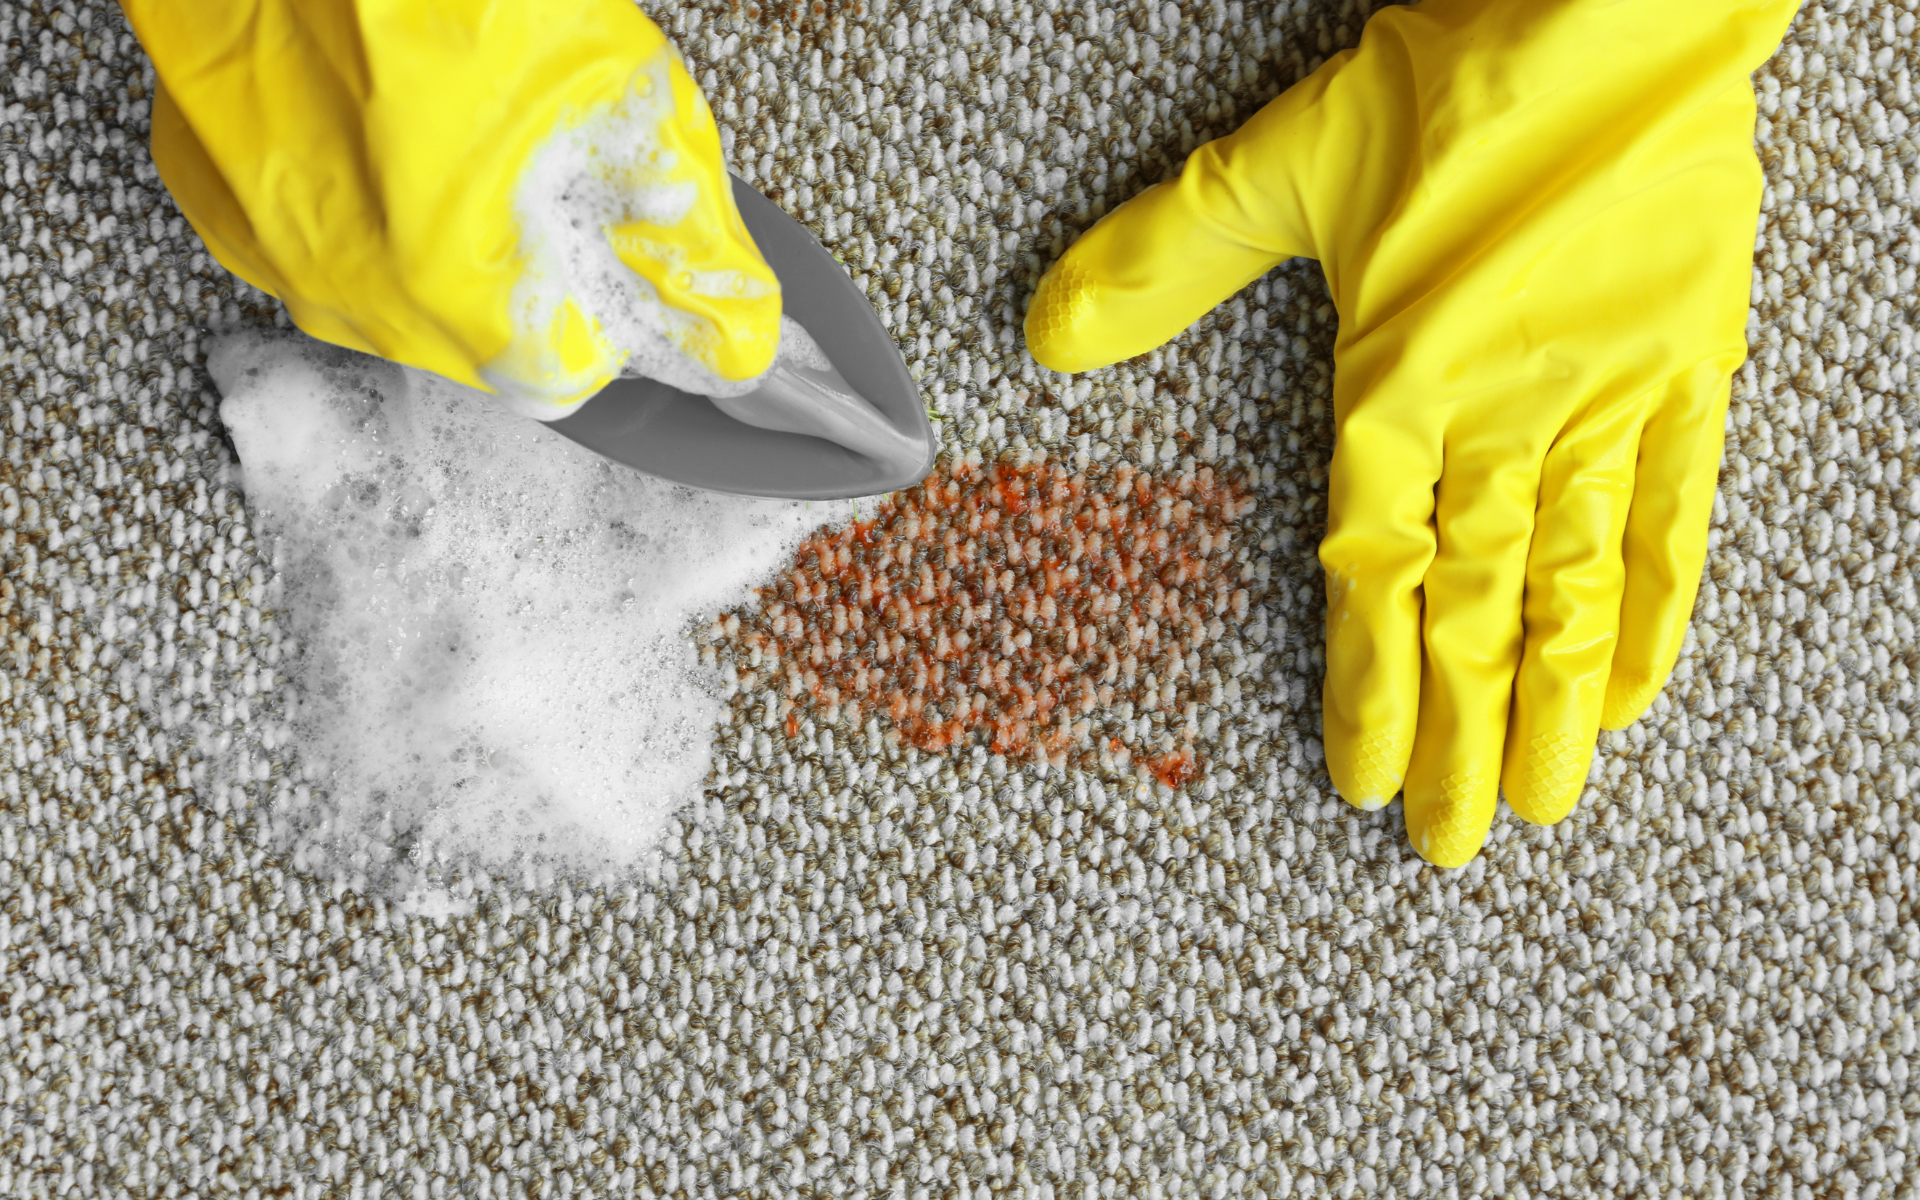 Spot cleaning of stains in upholstery